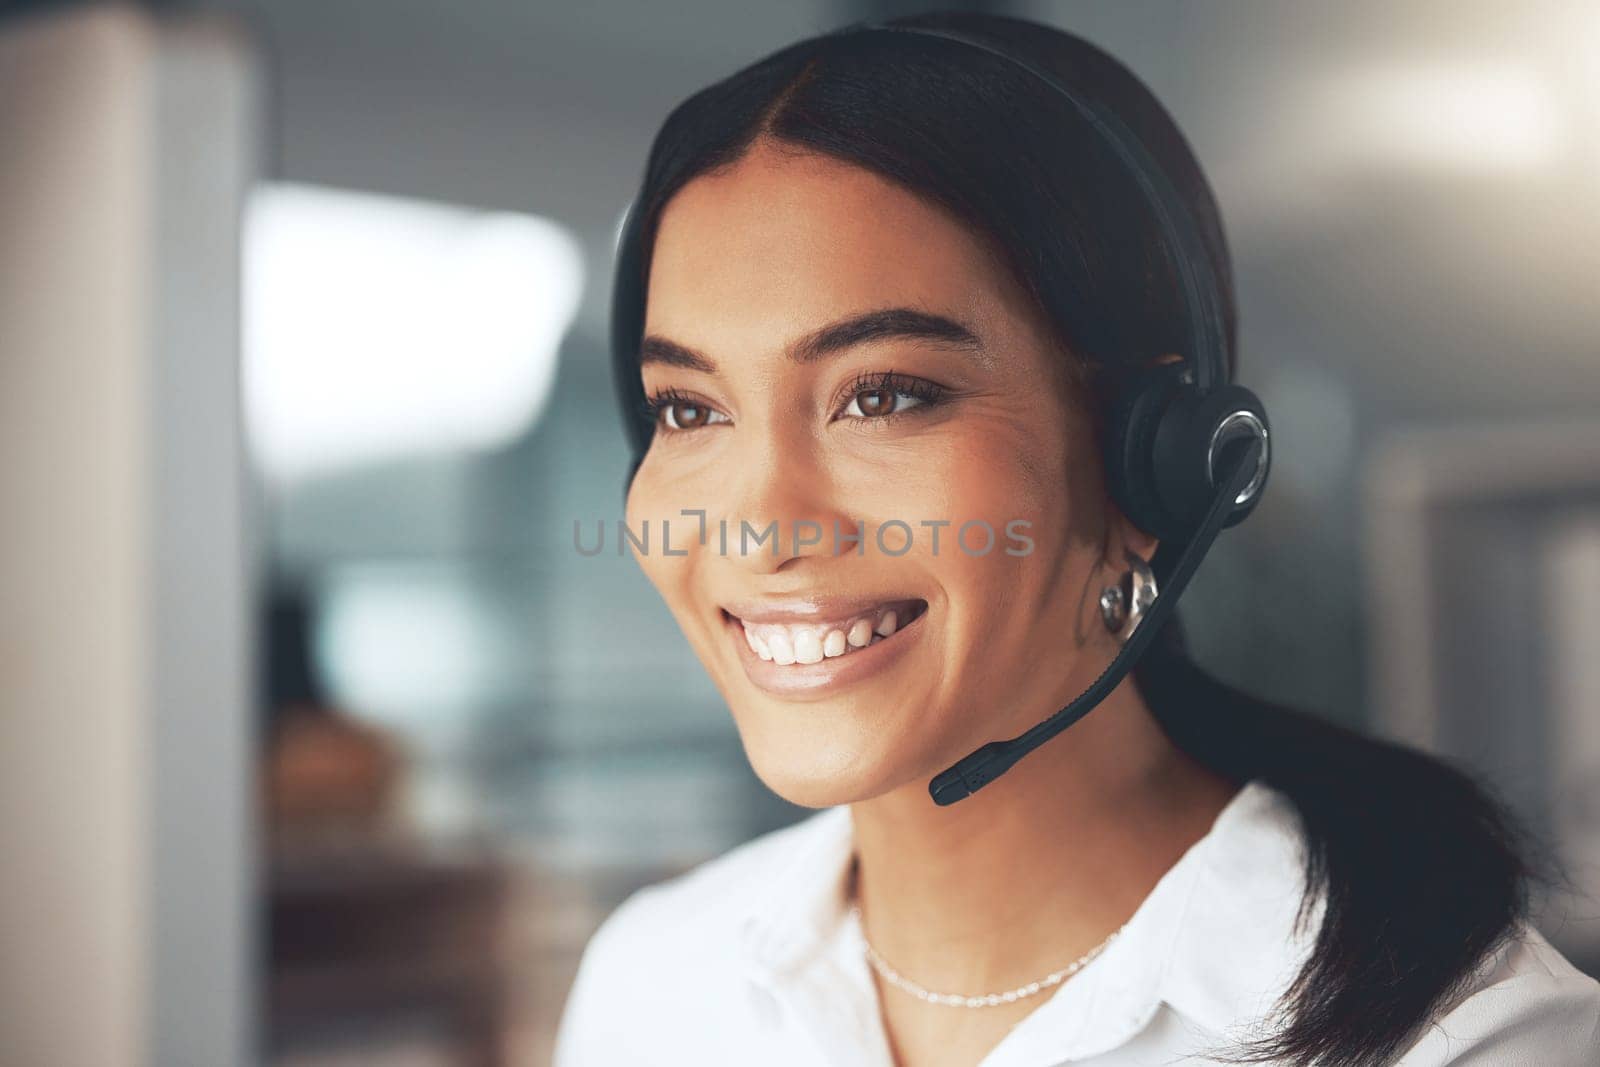 Call center, computer and smile with woman consultant in telemarketing office for help or sales. Contact us, face and headset with happy agent in workplace for online customer service or support.